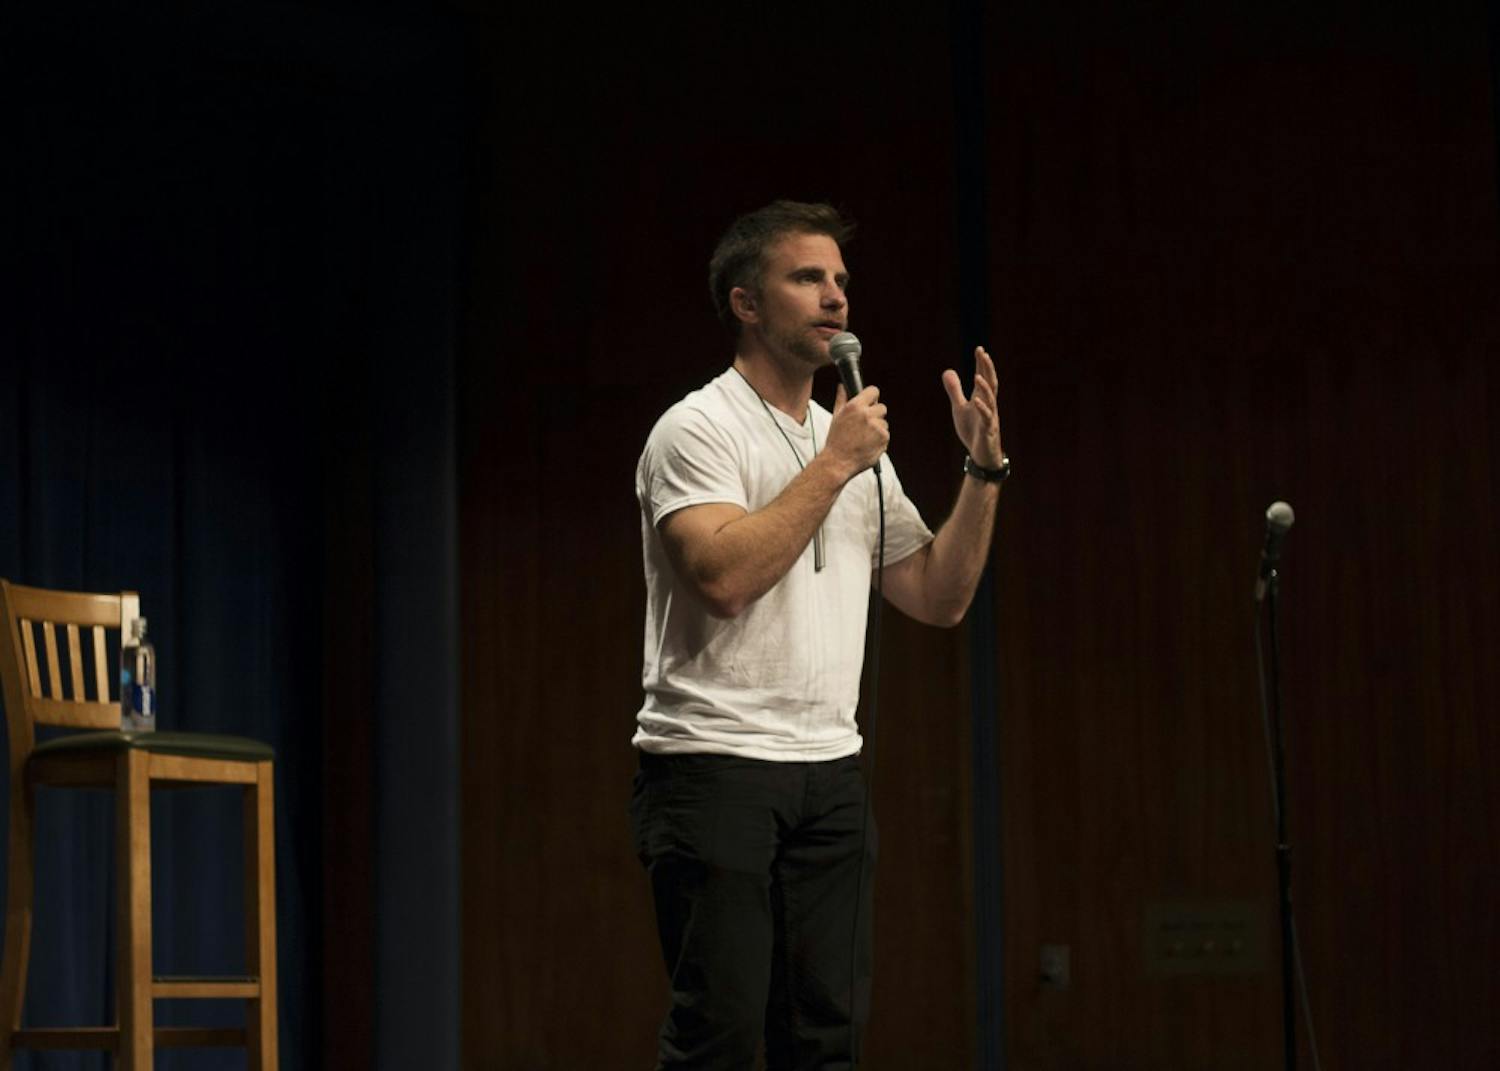 D.J. Demers performs Oct. 10 in the Whittenberger Auditorium. Demers performed his stand-up comedy set at no cost to the listeners. Demers' comedy centers on his observations and experiences while living with and without his hearing aids.